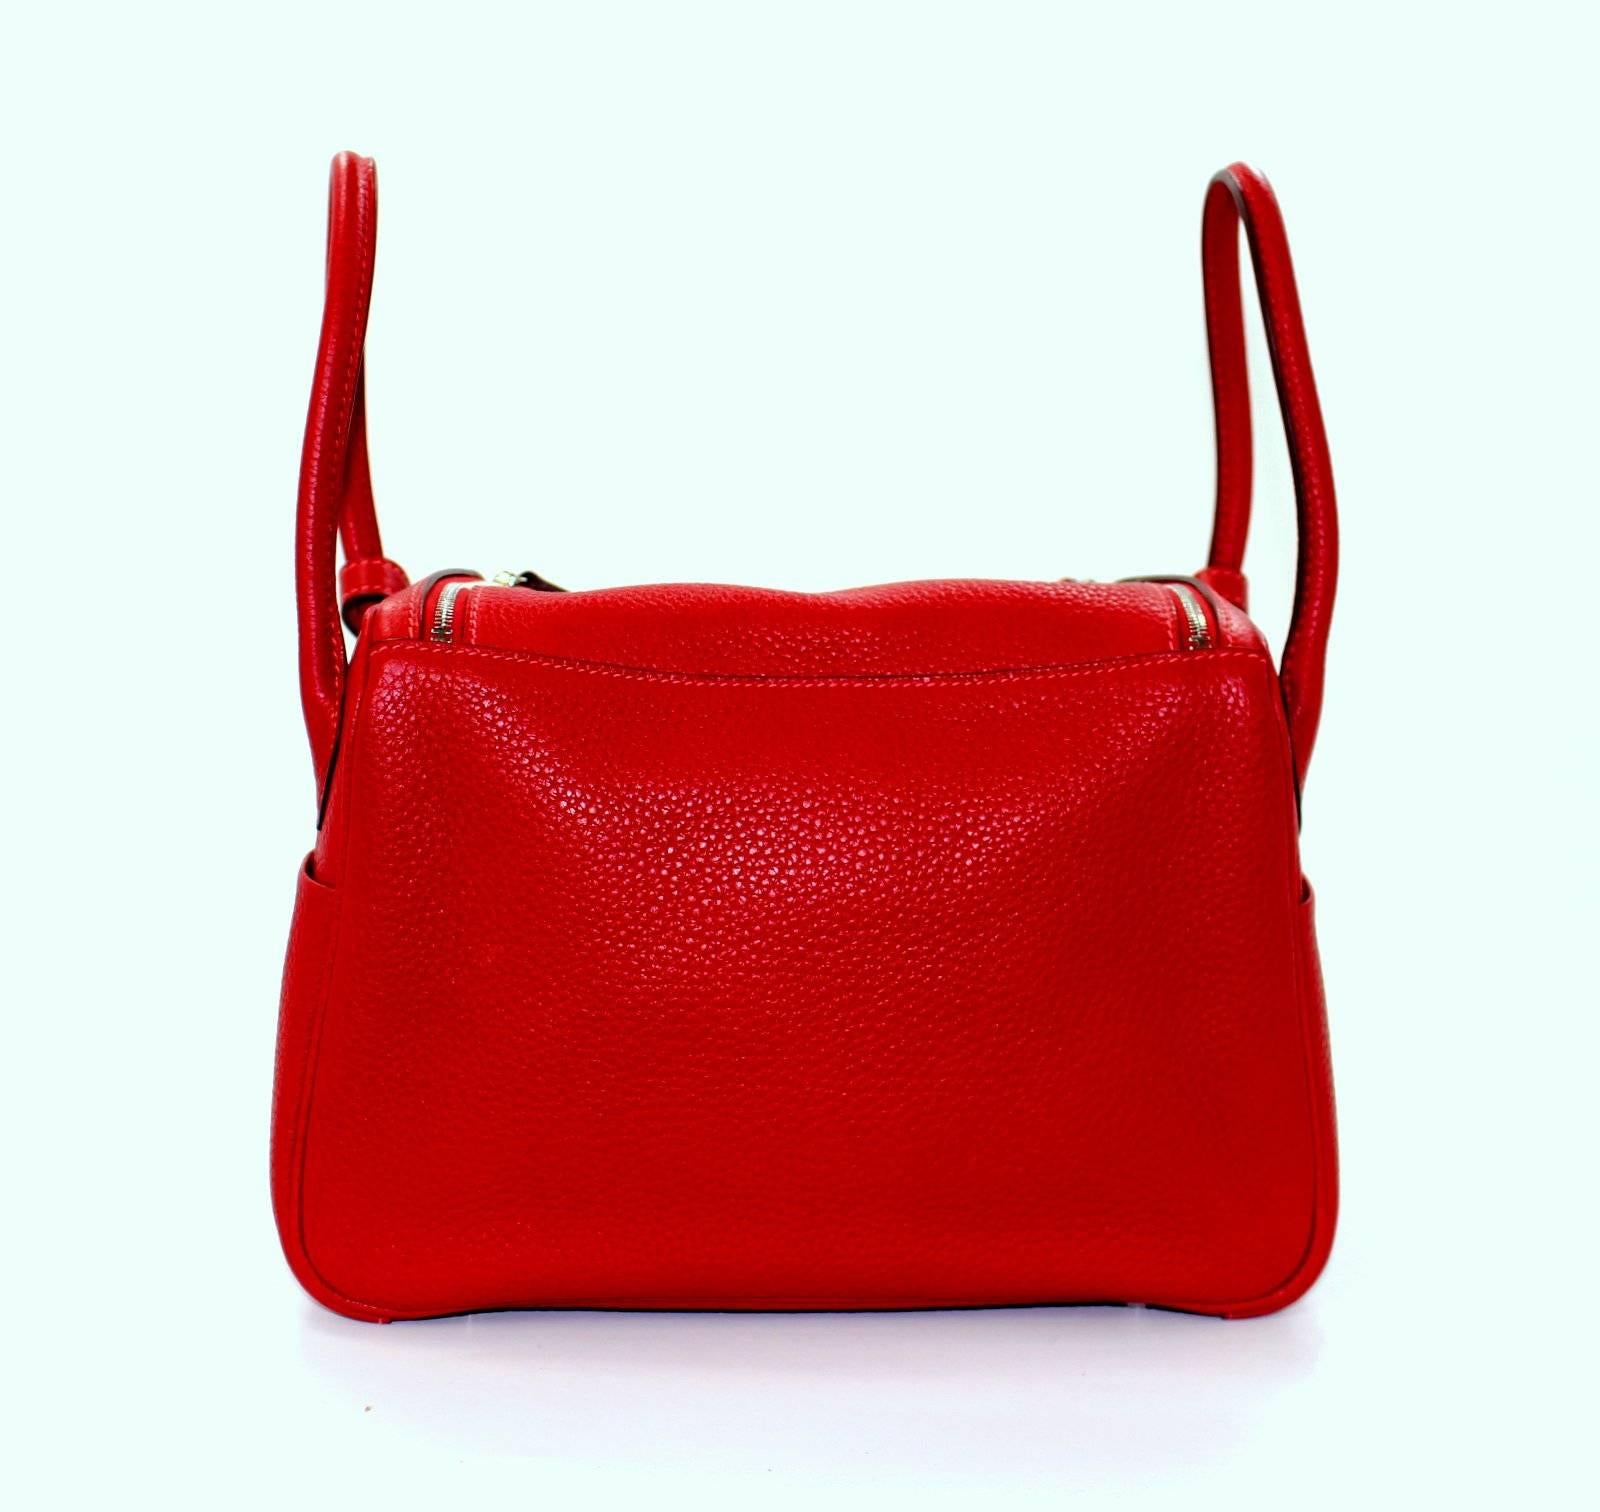 Hermès Rouge Casaque Clemence Lindy 26 cm, PHW- Pristine; Plastic on all hardware except bottom feet

The sporty sister of the Hermès Birkin and Kelly, the Lindy can be carried in hand or on the shoulder.  The slightly relaxed slouch of the